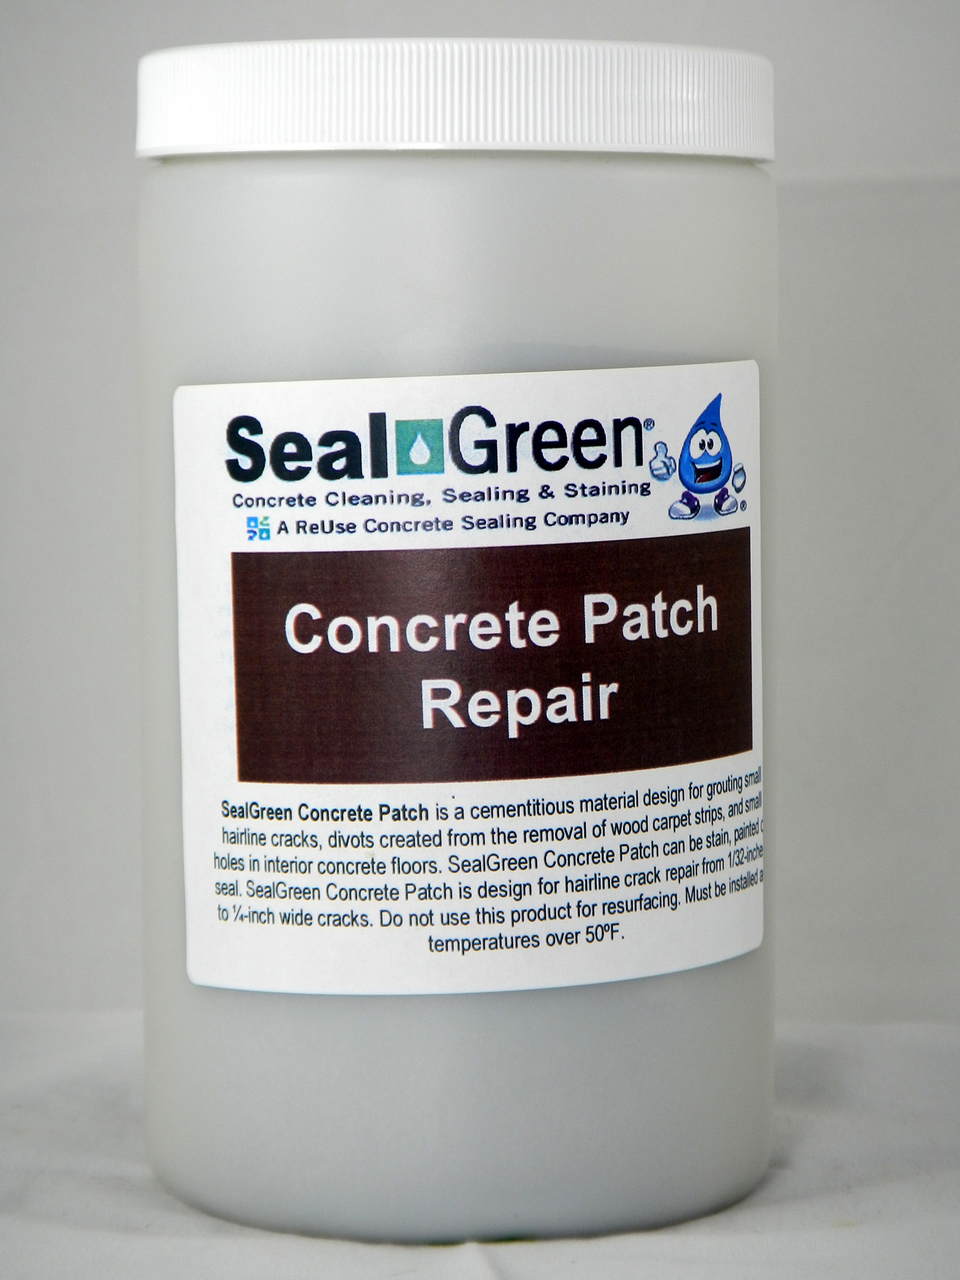 Is SealGreen Concrete Patch a stainable concrete crack filler?